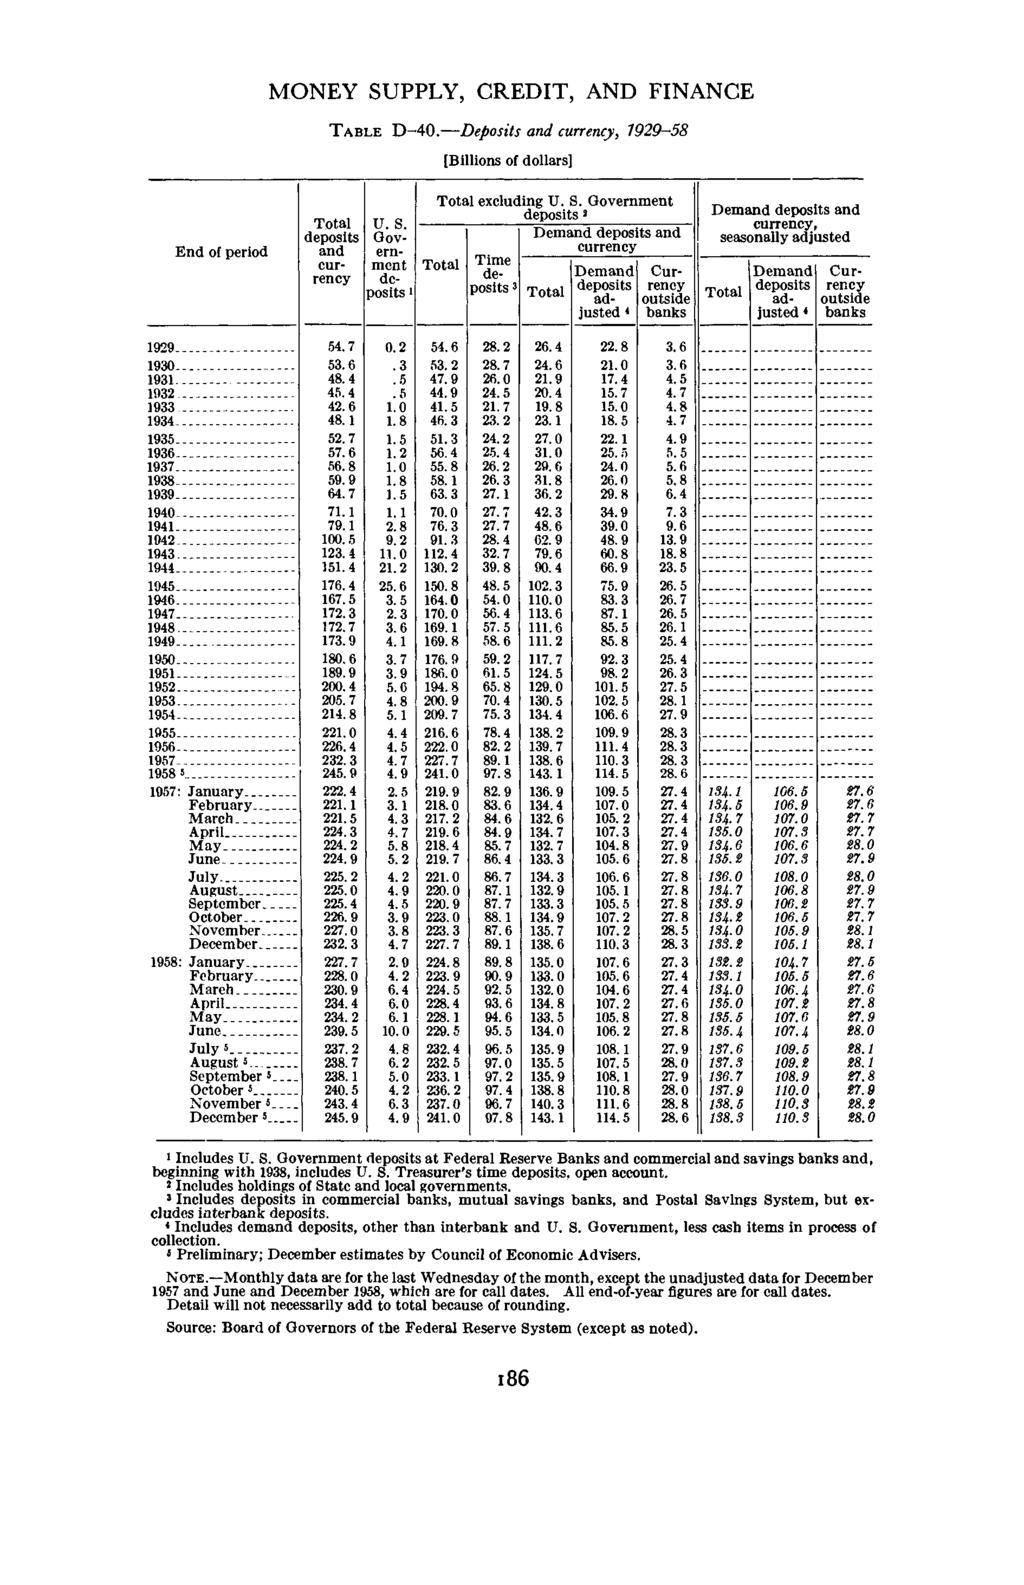 1959 MONEY SUPPLY, CREDIT, AND FINANCE TABLE D-40. Deposits, -58 End of period Gov- ern- ment i excluding U. S. 2 3 adjusted 4, seasonally adjusted adjusted 4 1933 1943 1957 1958 s 1957: January February.